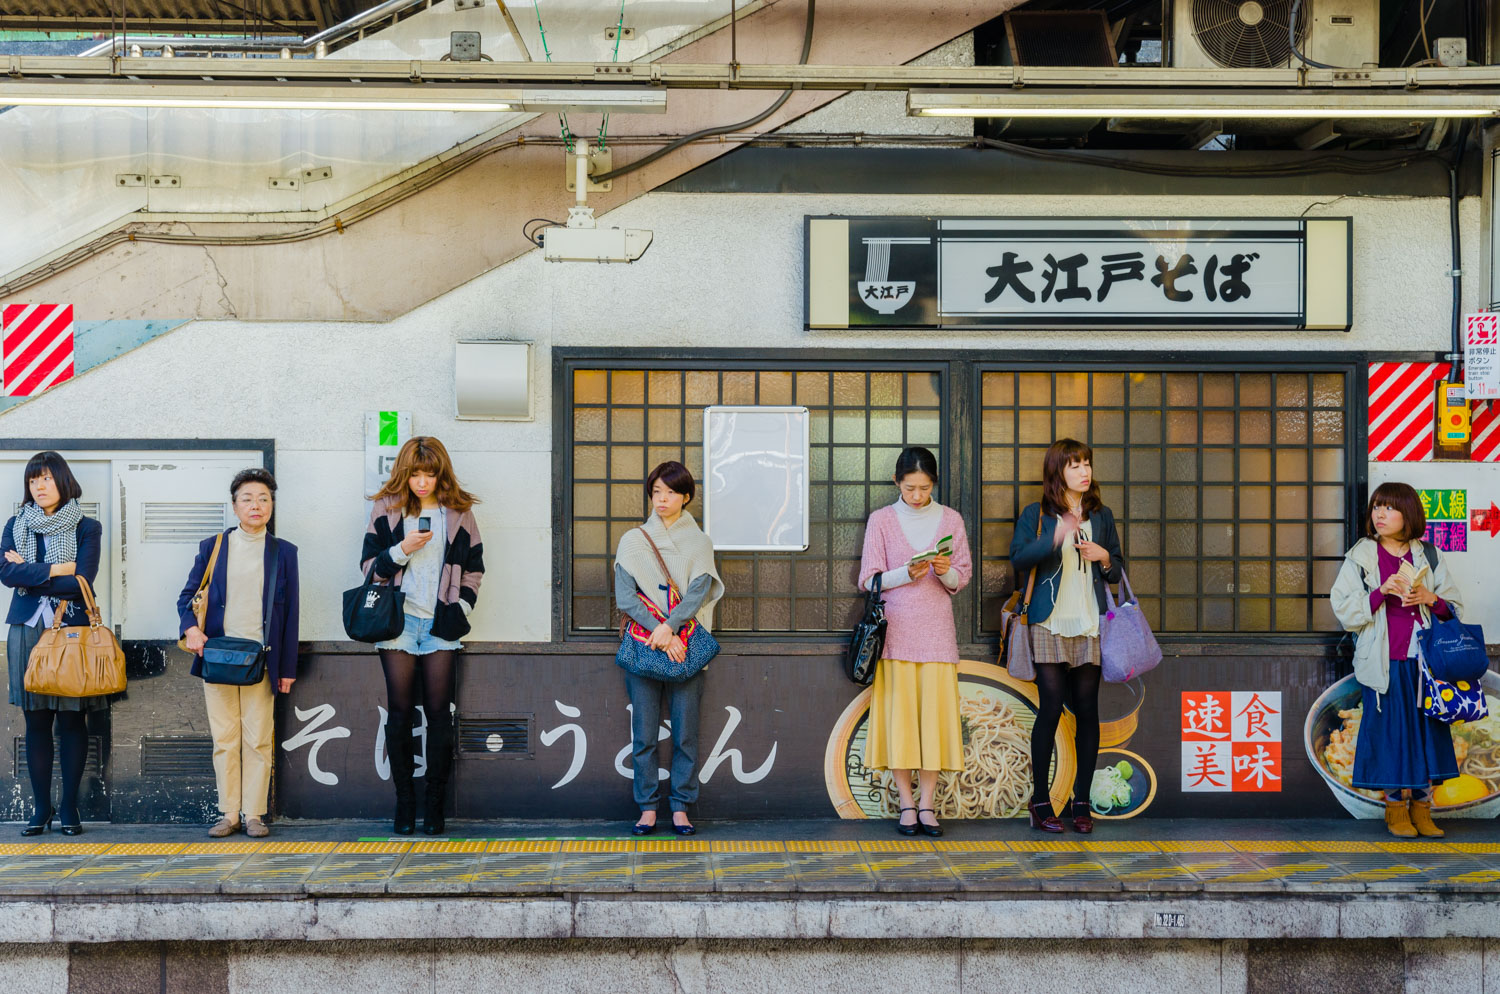  At Nippori Station seven women wait for a train, all are different ages, some are young, some are not,&nbsp;&nbsp;each doing something different, each in different style of dress 